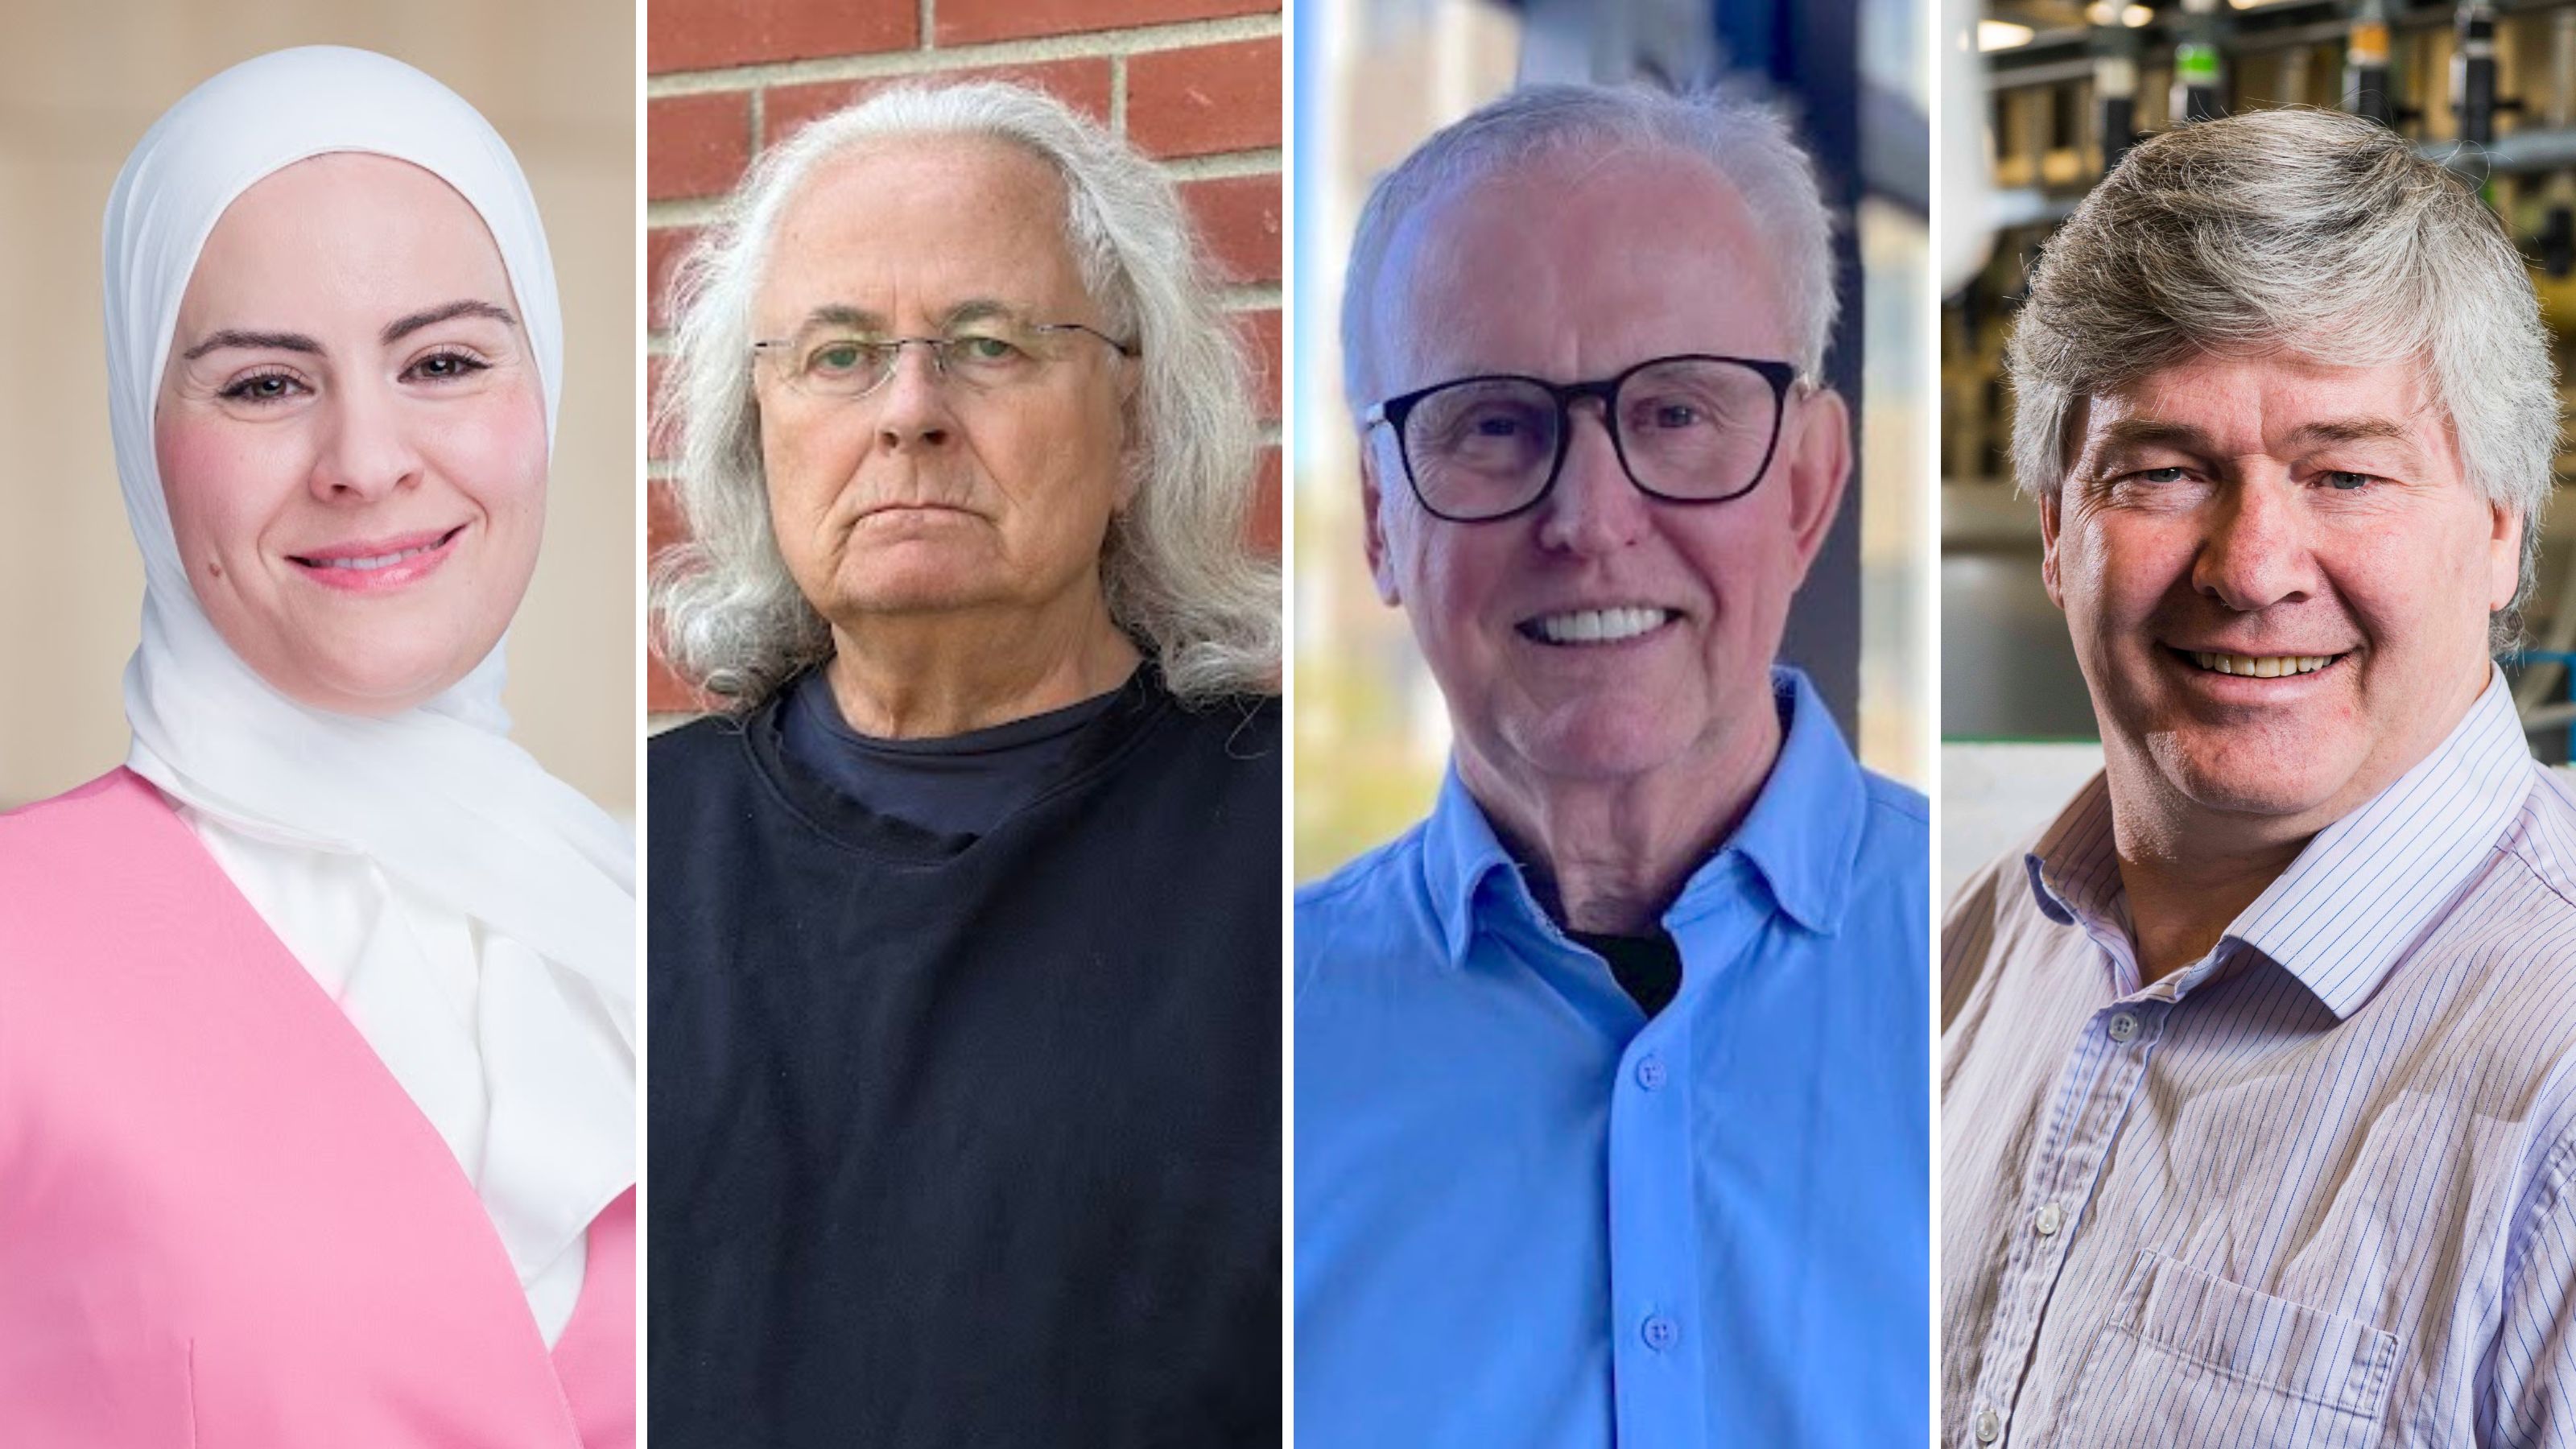 Recipients of the 2023 Awards for Faculty Excellence: Fatima Mraiche, Frank Tough, Greg Goss, David Olson